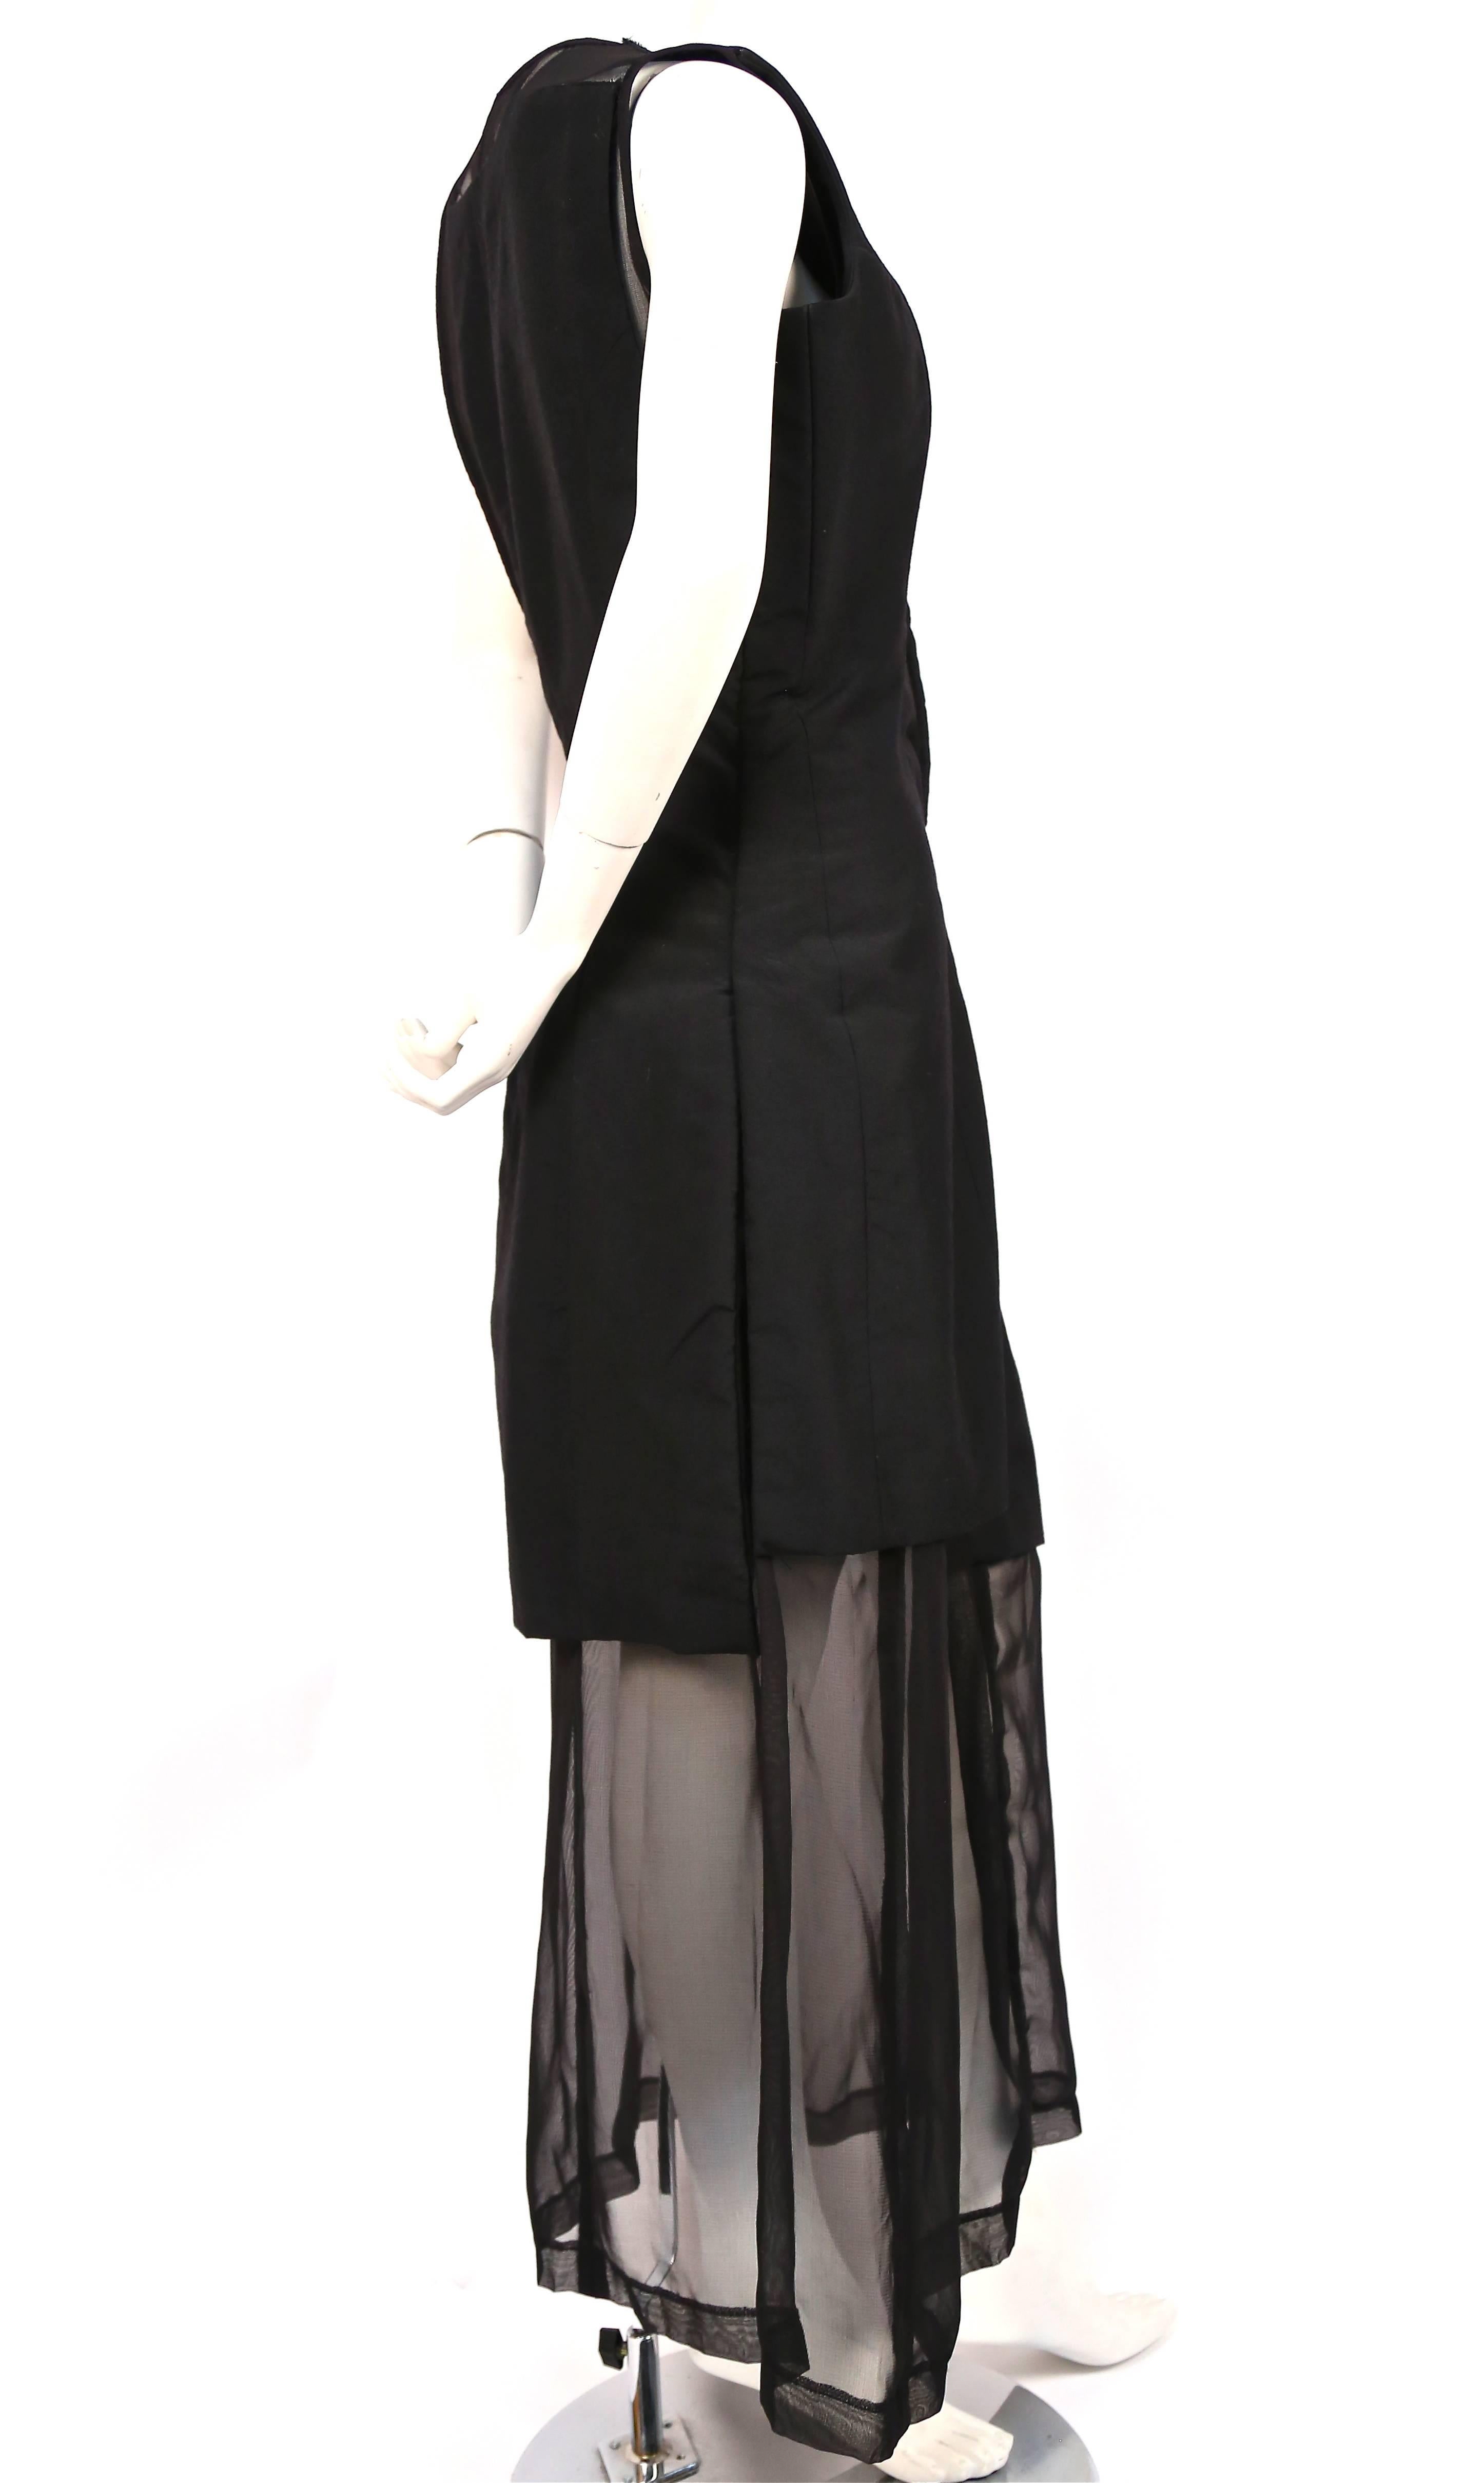 Black padded dress with sheer inserts and skirting from Comme Des Garcons dating to Fall of 1997 exactly as seen on the runway. Labeled a size 'M'. Approximate measurement: bust 40", waist 36", hips 42" and length 55-56".  Side